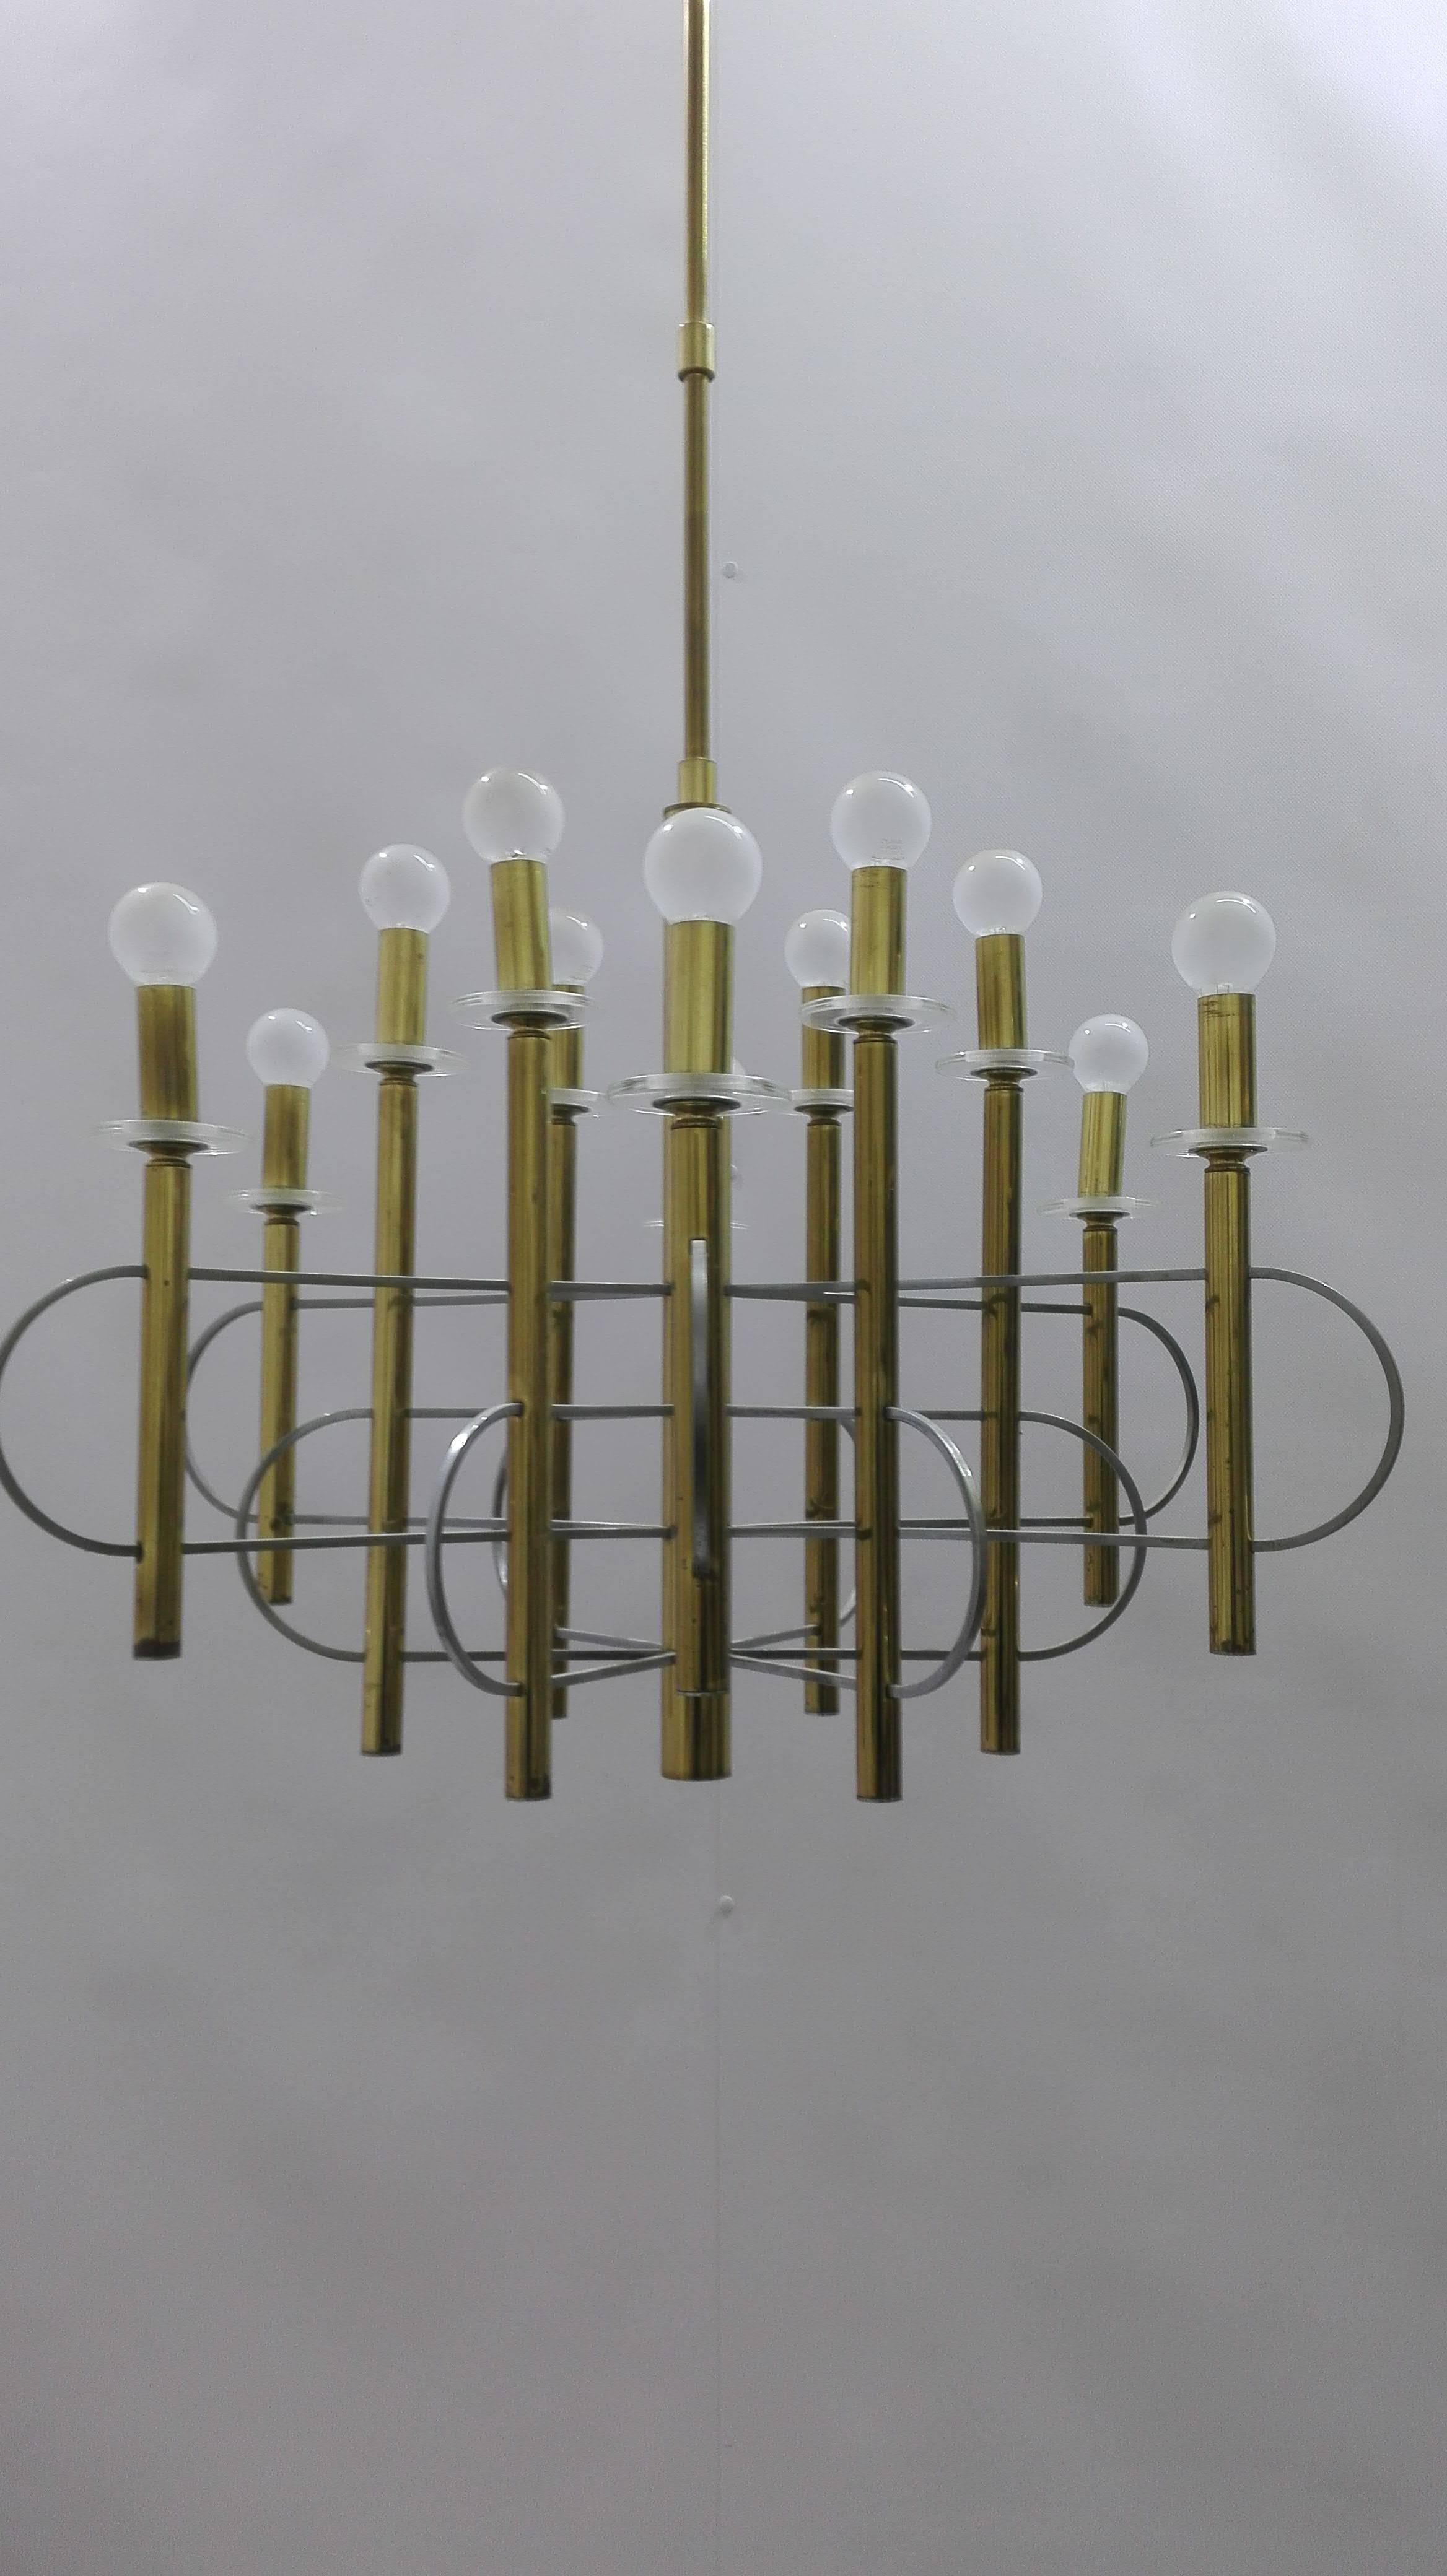 A brass, chrome and glass twelve-light chandelier by Gaetano Sciolari (1927-1994), the twelve two-tiered lights with a circular glass drip pan supporting a brass sleeve, interlaced together around the central brass them by chrome atom-like spokes.